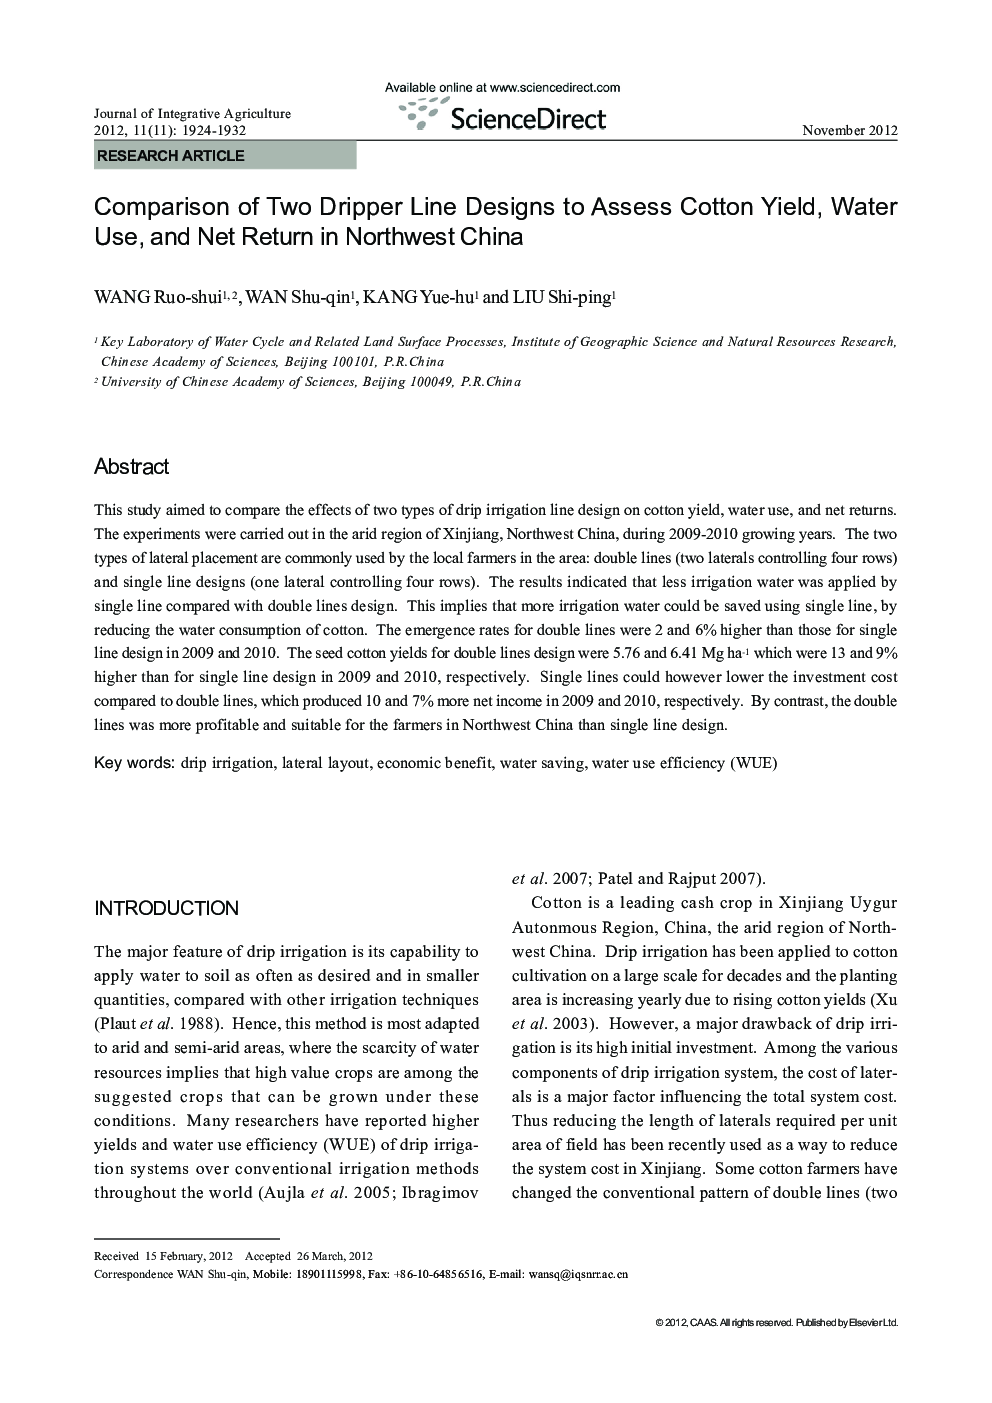 Comparison of Two Dripper Line Designs to Assess Cotton Yield, Water Use, and Net Return in Northwest China